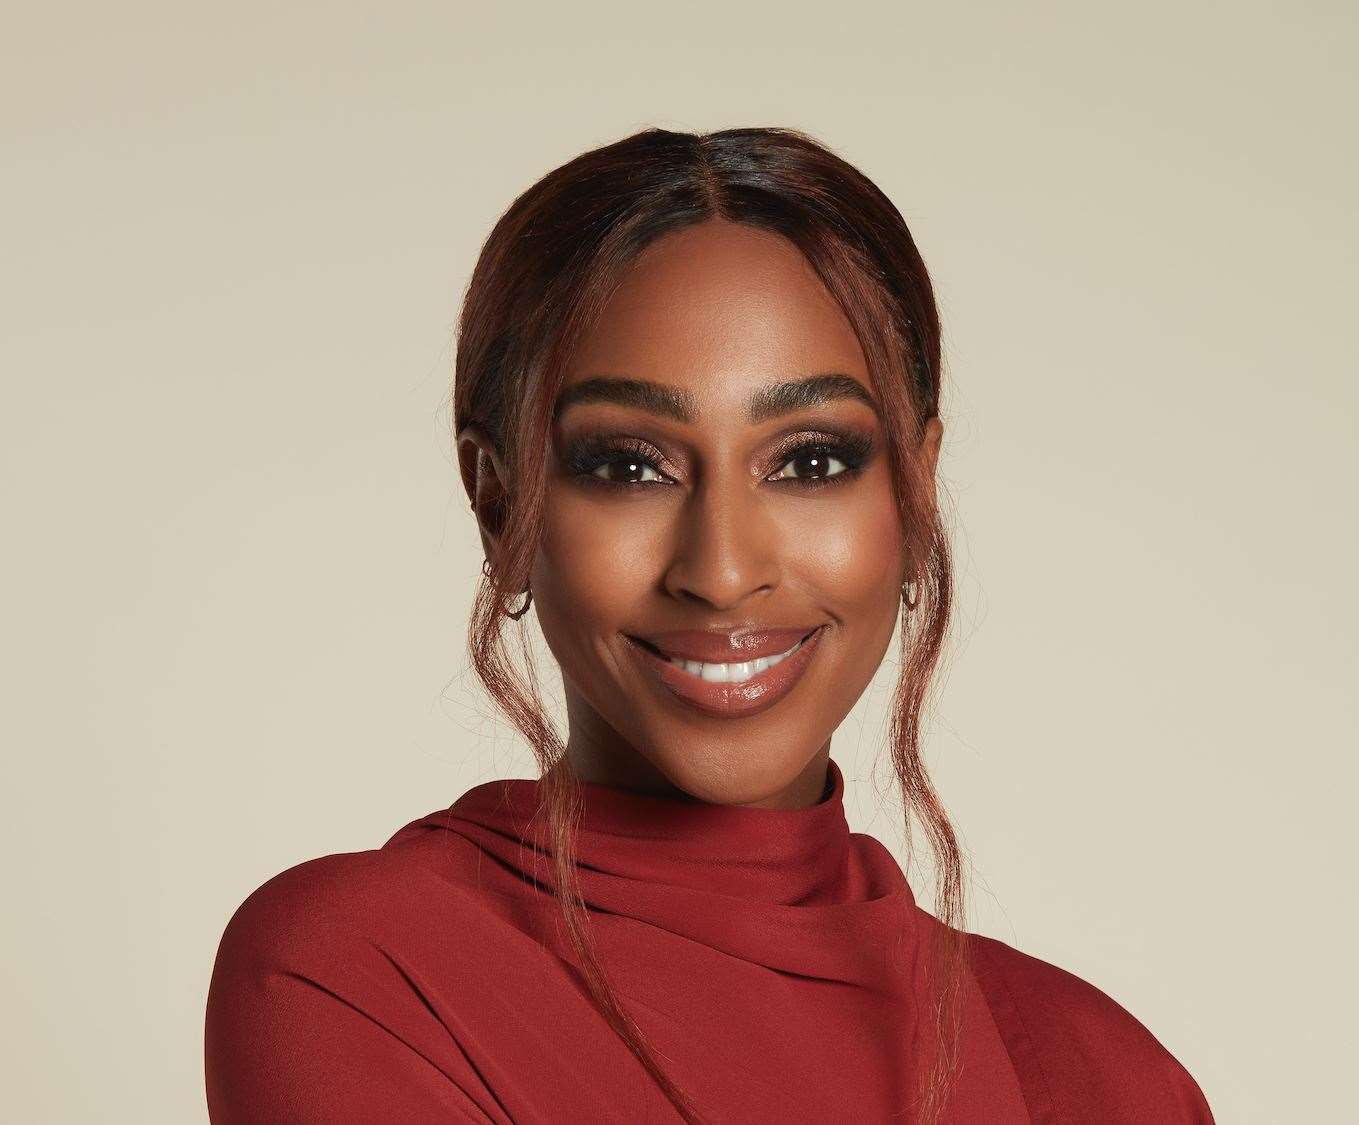 Alexandra Burke will not be performing at this year's Canterbury Pride festival